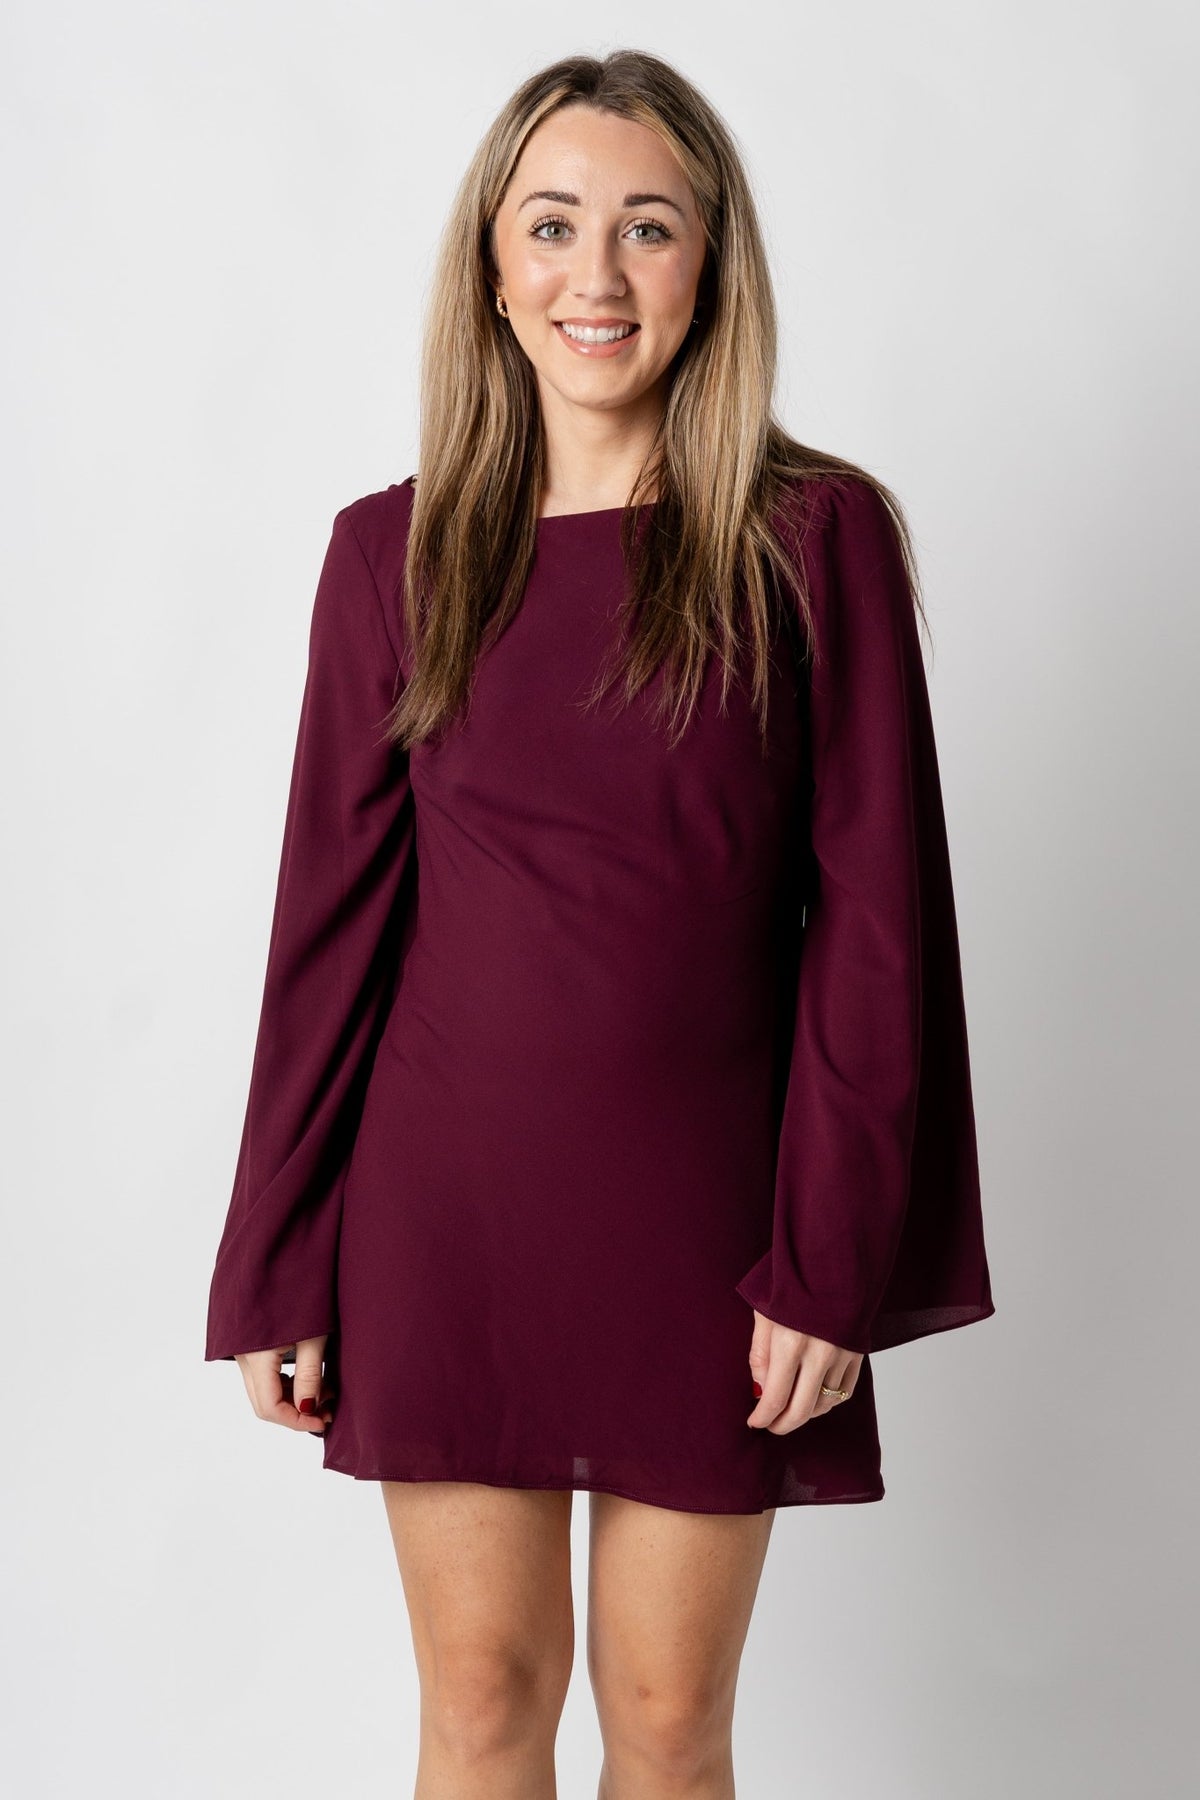 Bell sleeve mini dress wine - Cute dress - Trendy Dresses at Lush Fashion Lounge Boutique in Oklahoma City